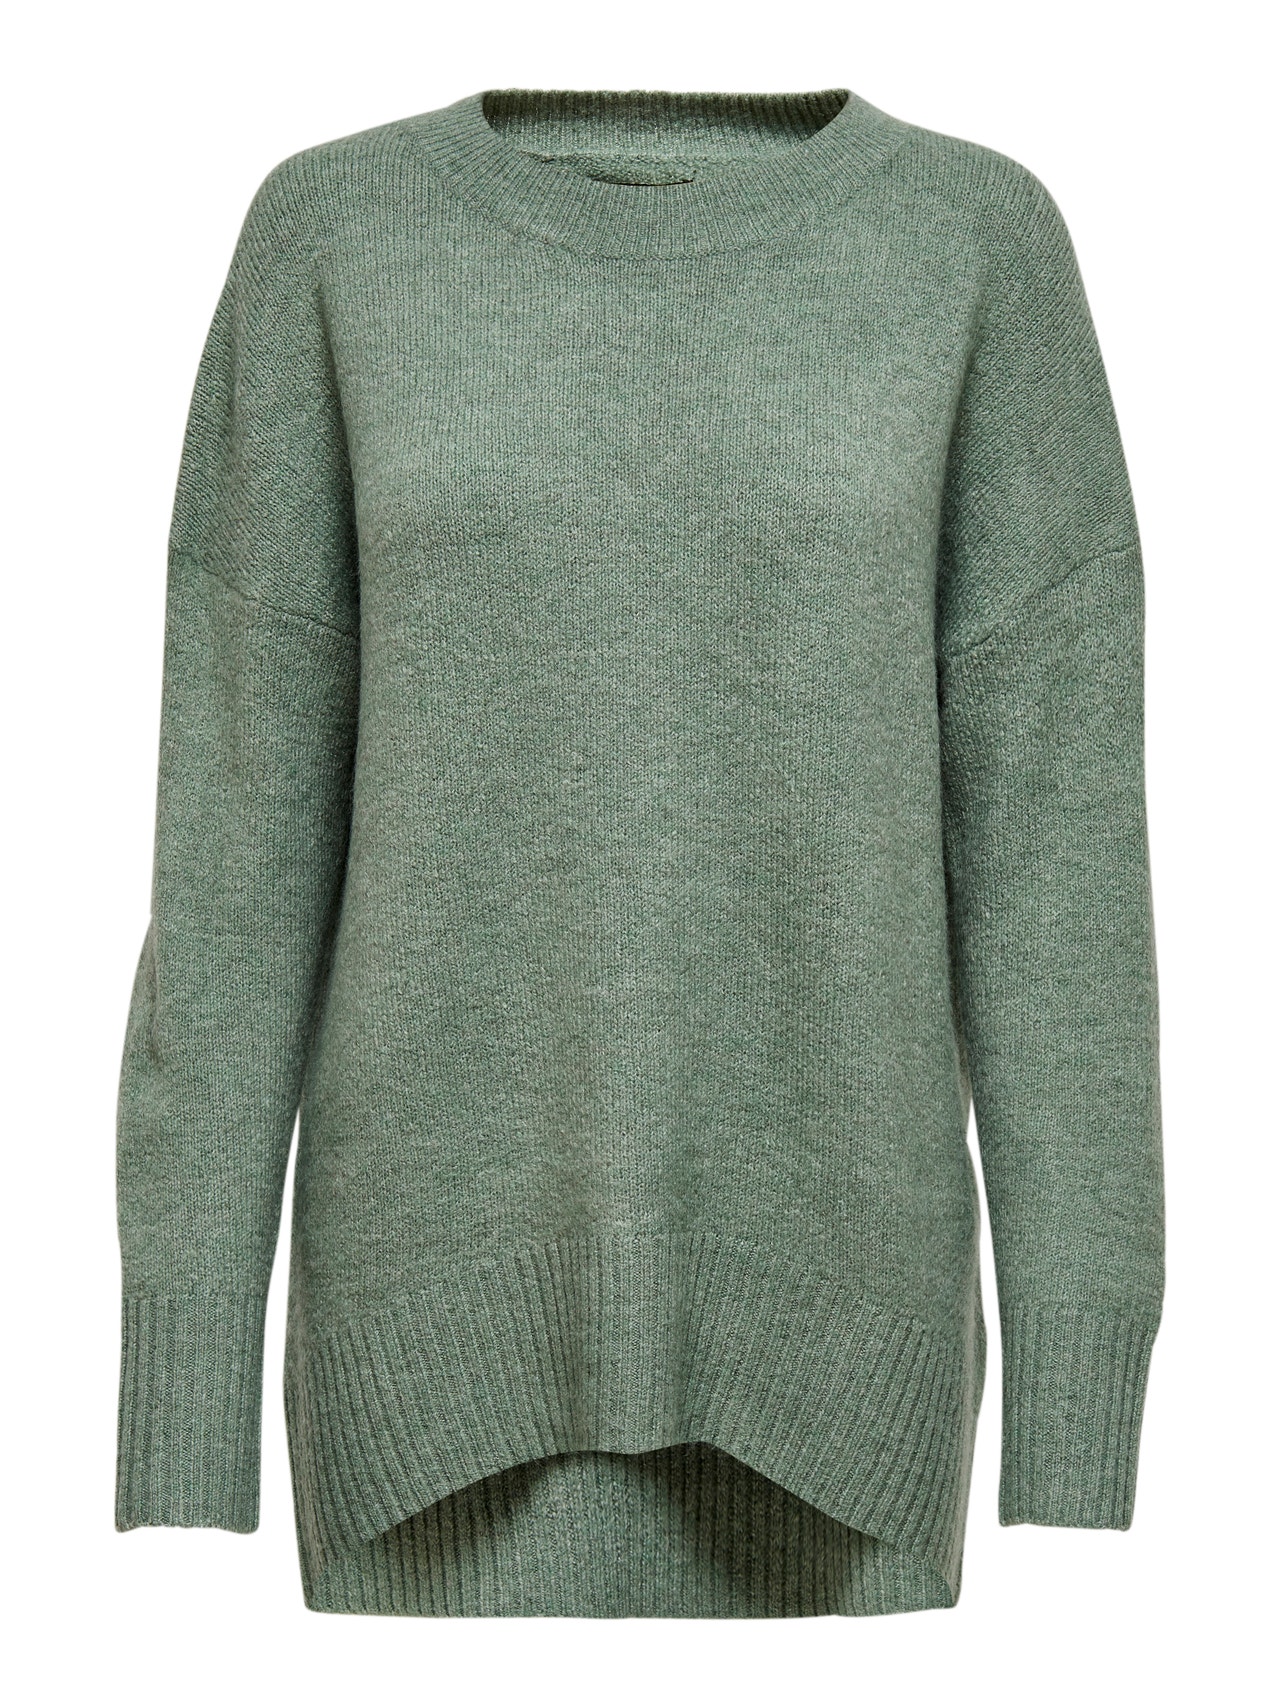 ONLY Pull-overs Regular Fit Col rond Bas hauts Épaules tombantes -Balsam Green - 15173800